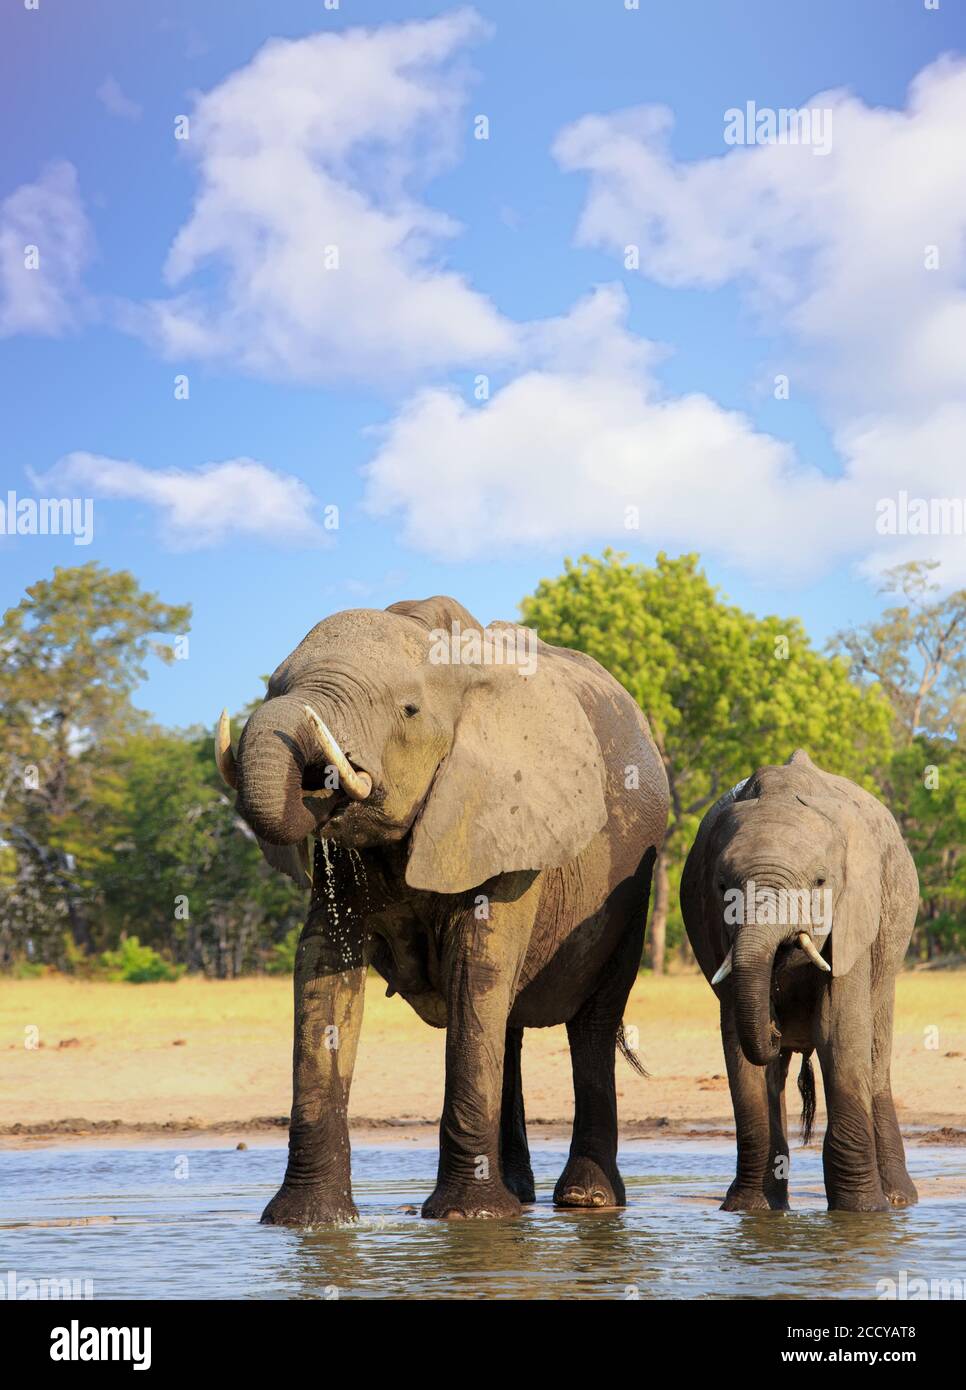 Little and Large Elephant drinking at a waterhole, with trunk curled into mouth with water droplets dripping.  Hwange National Park, Zimbabwe Stock Photo